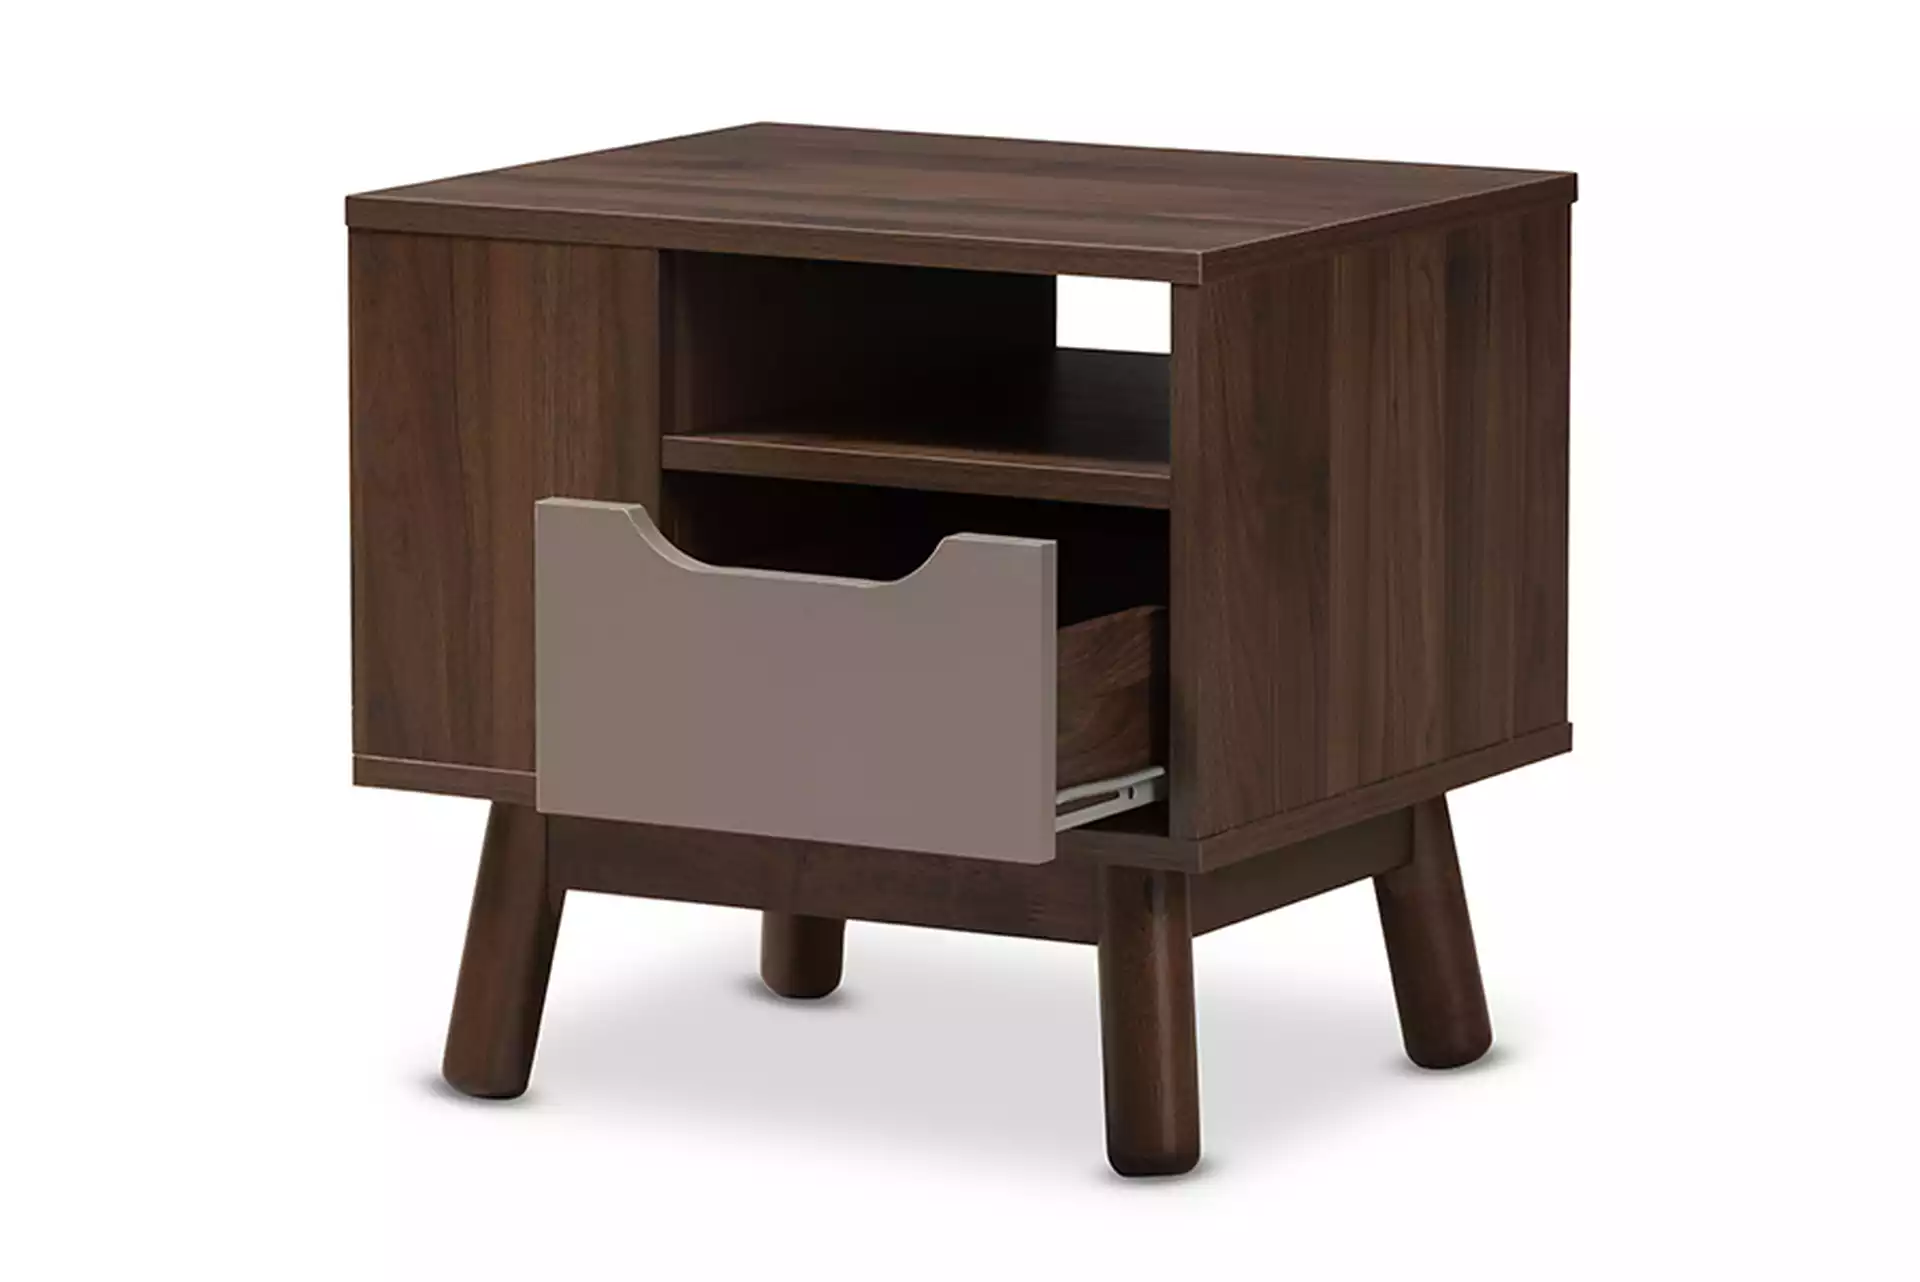 Britta Mid-Century Modern Walnut Brown and Grey Two-Tone Finished Wood Nightstand